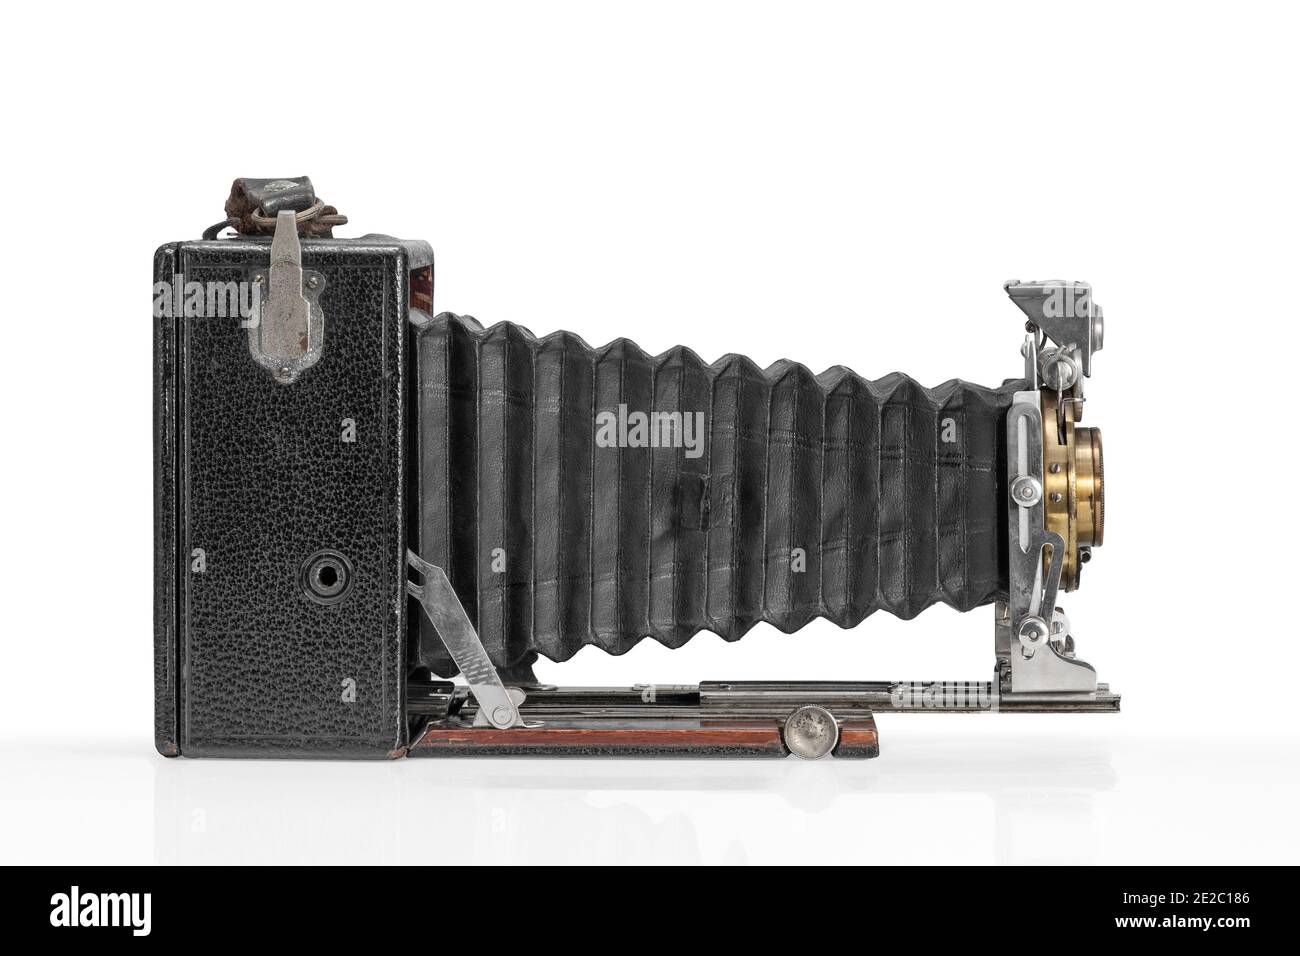 ENSIGN KLITO FOLDING PLATE CAMERA RECTIMAT SYMMETRICAL Houghton Ensign Klito. Double Extension Bellows Rack and Pinion Focusing. Clipping Path in JPEG Stock Photo